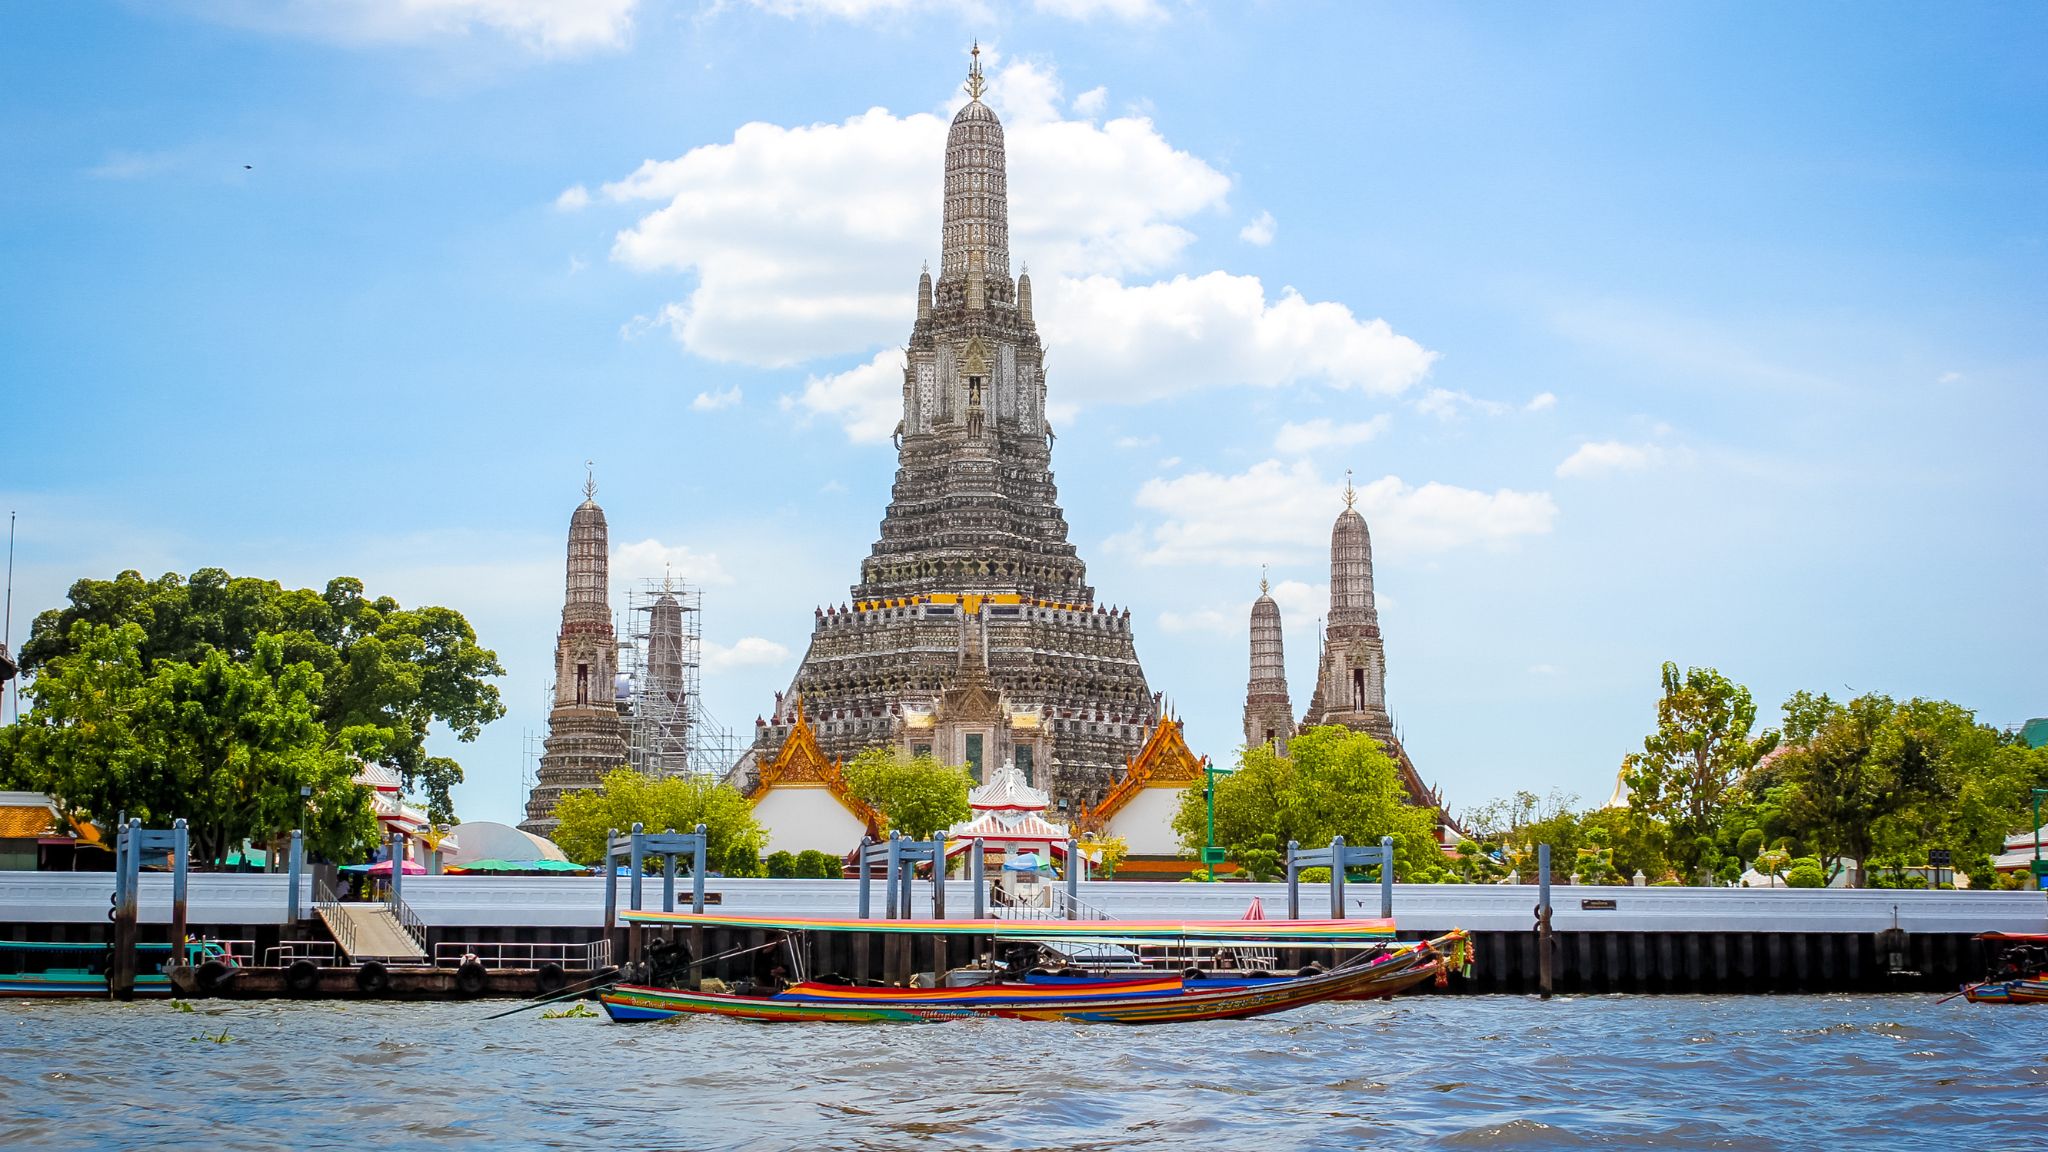 Day 2 Enjoy The Beauty Of Wat Arun While Floating On The Chao Phraya River